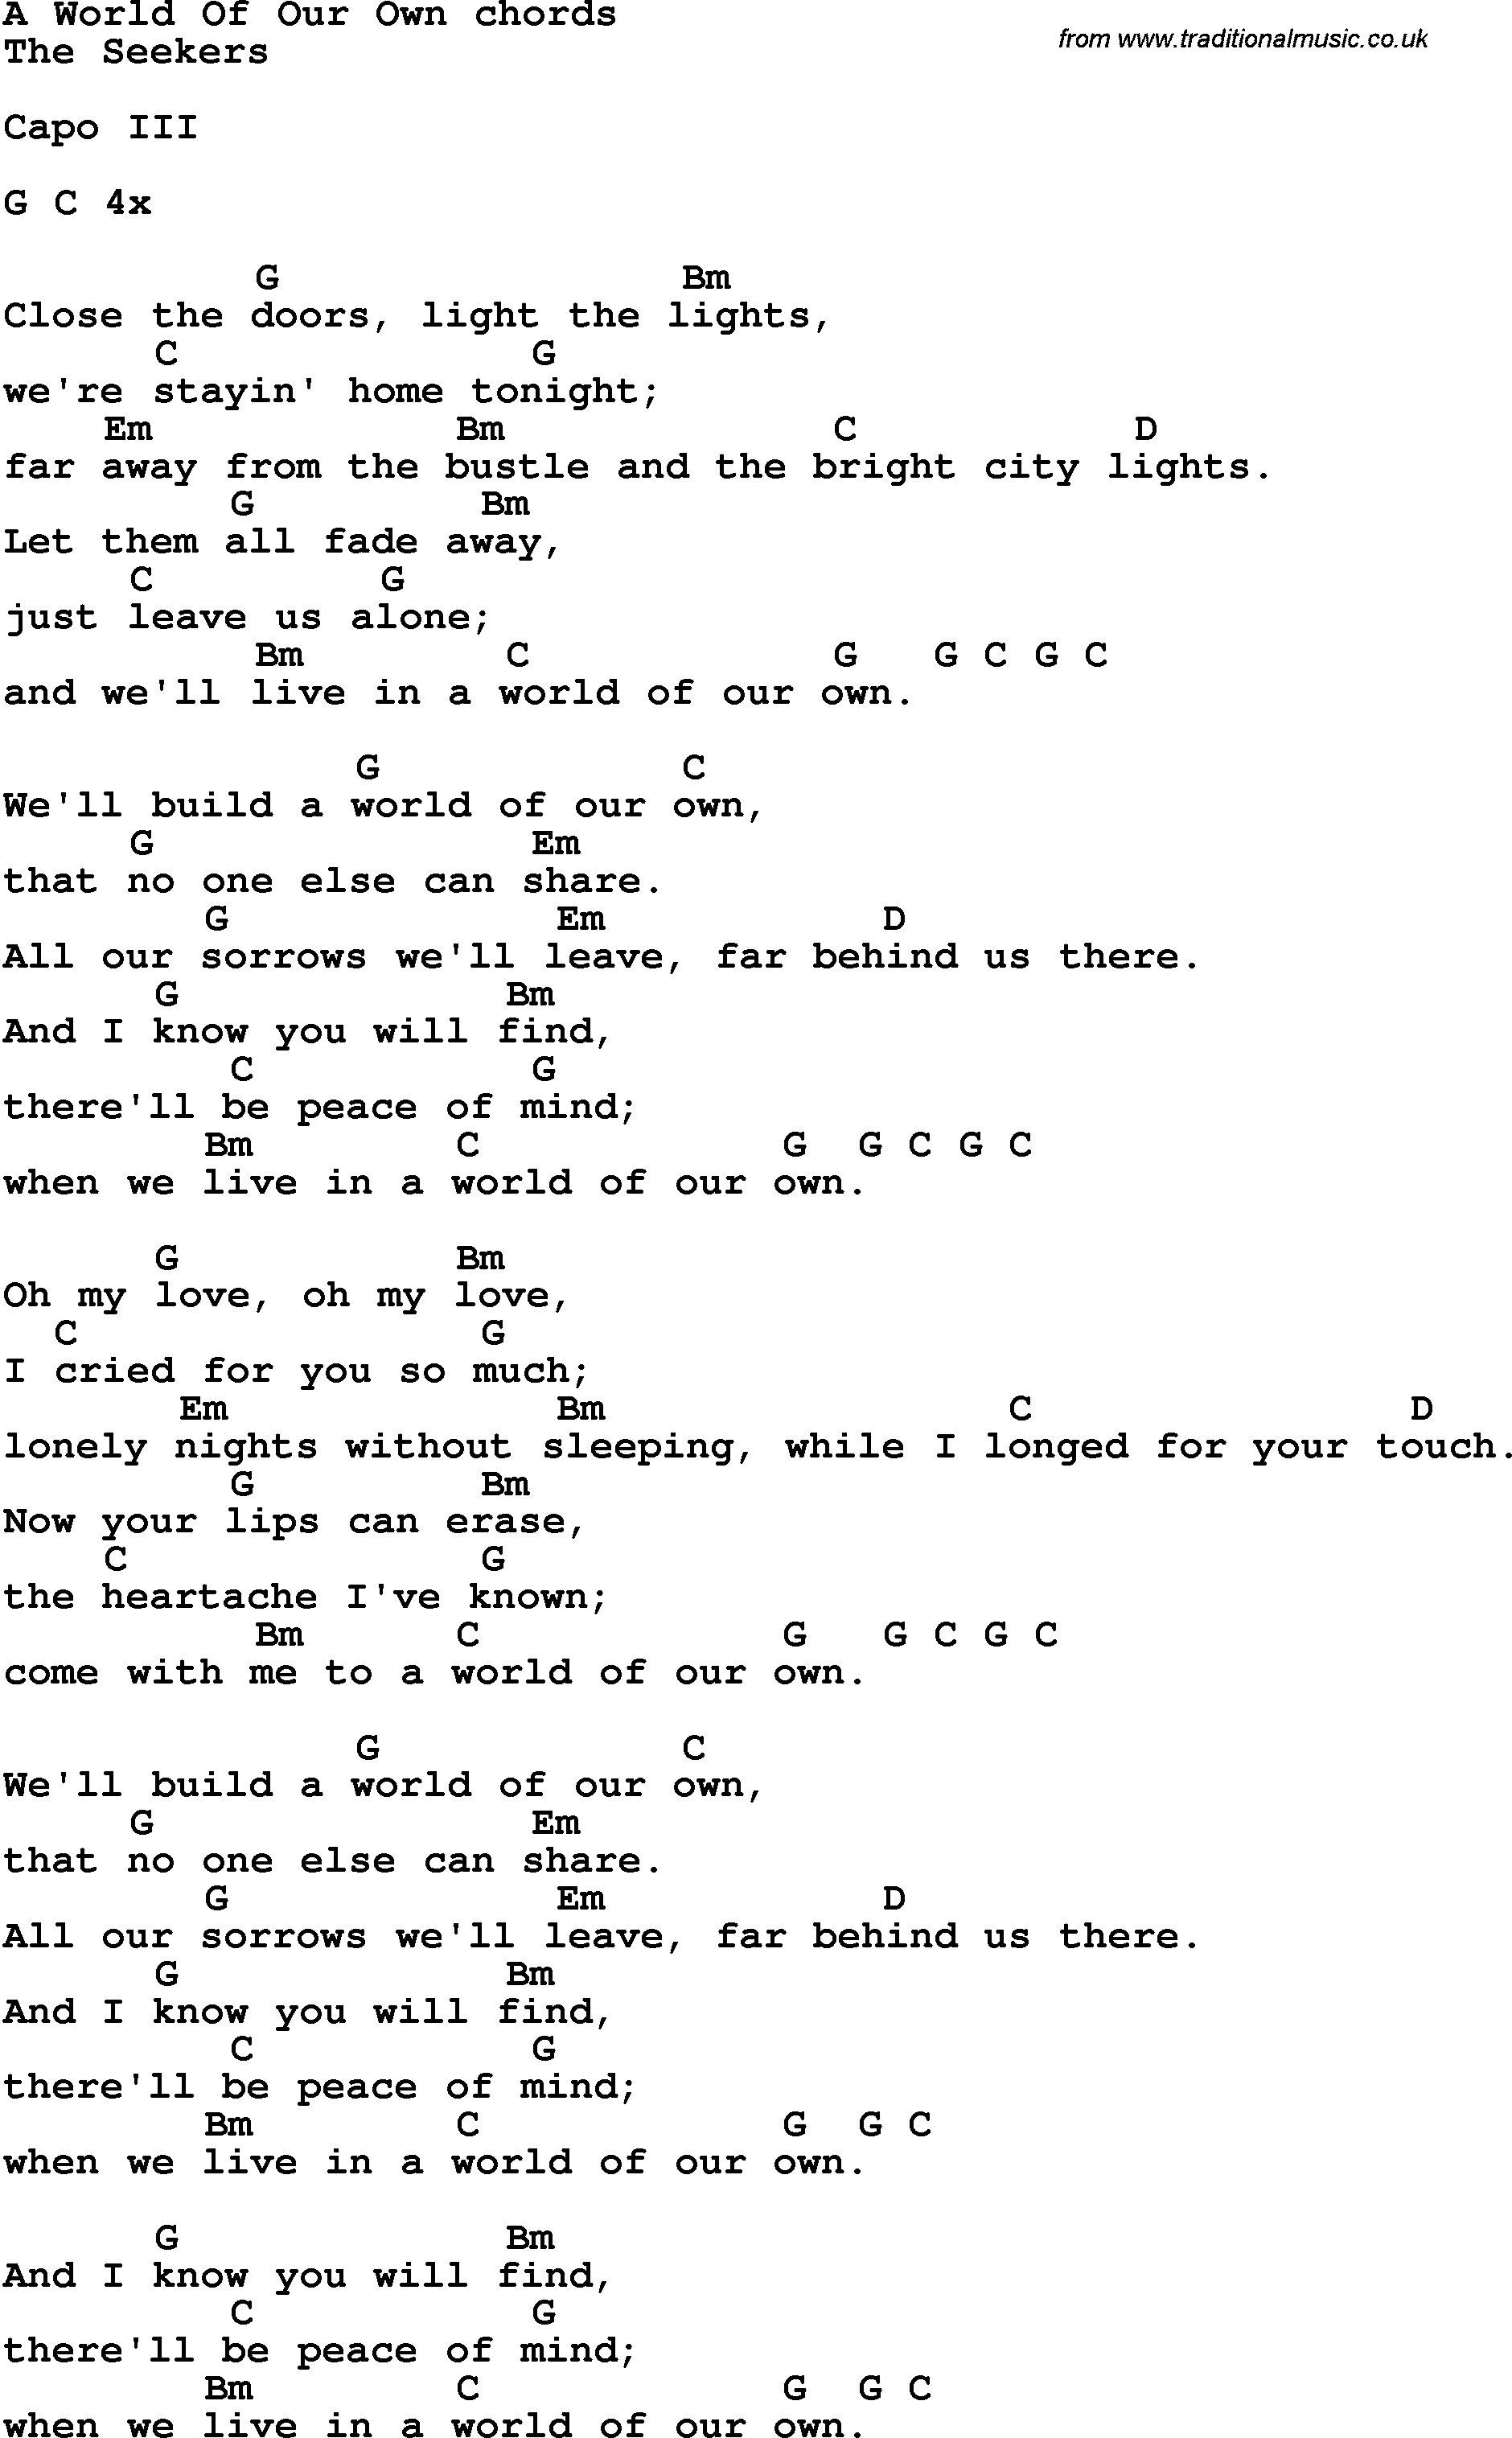 Song Lyrics with guitar chords for A World Of Our Own